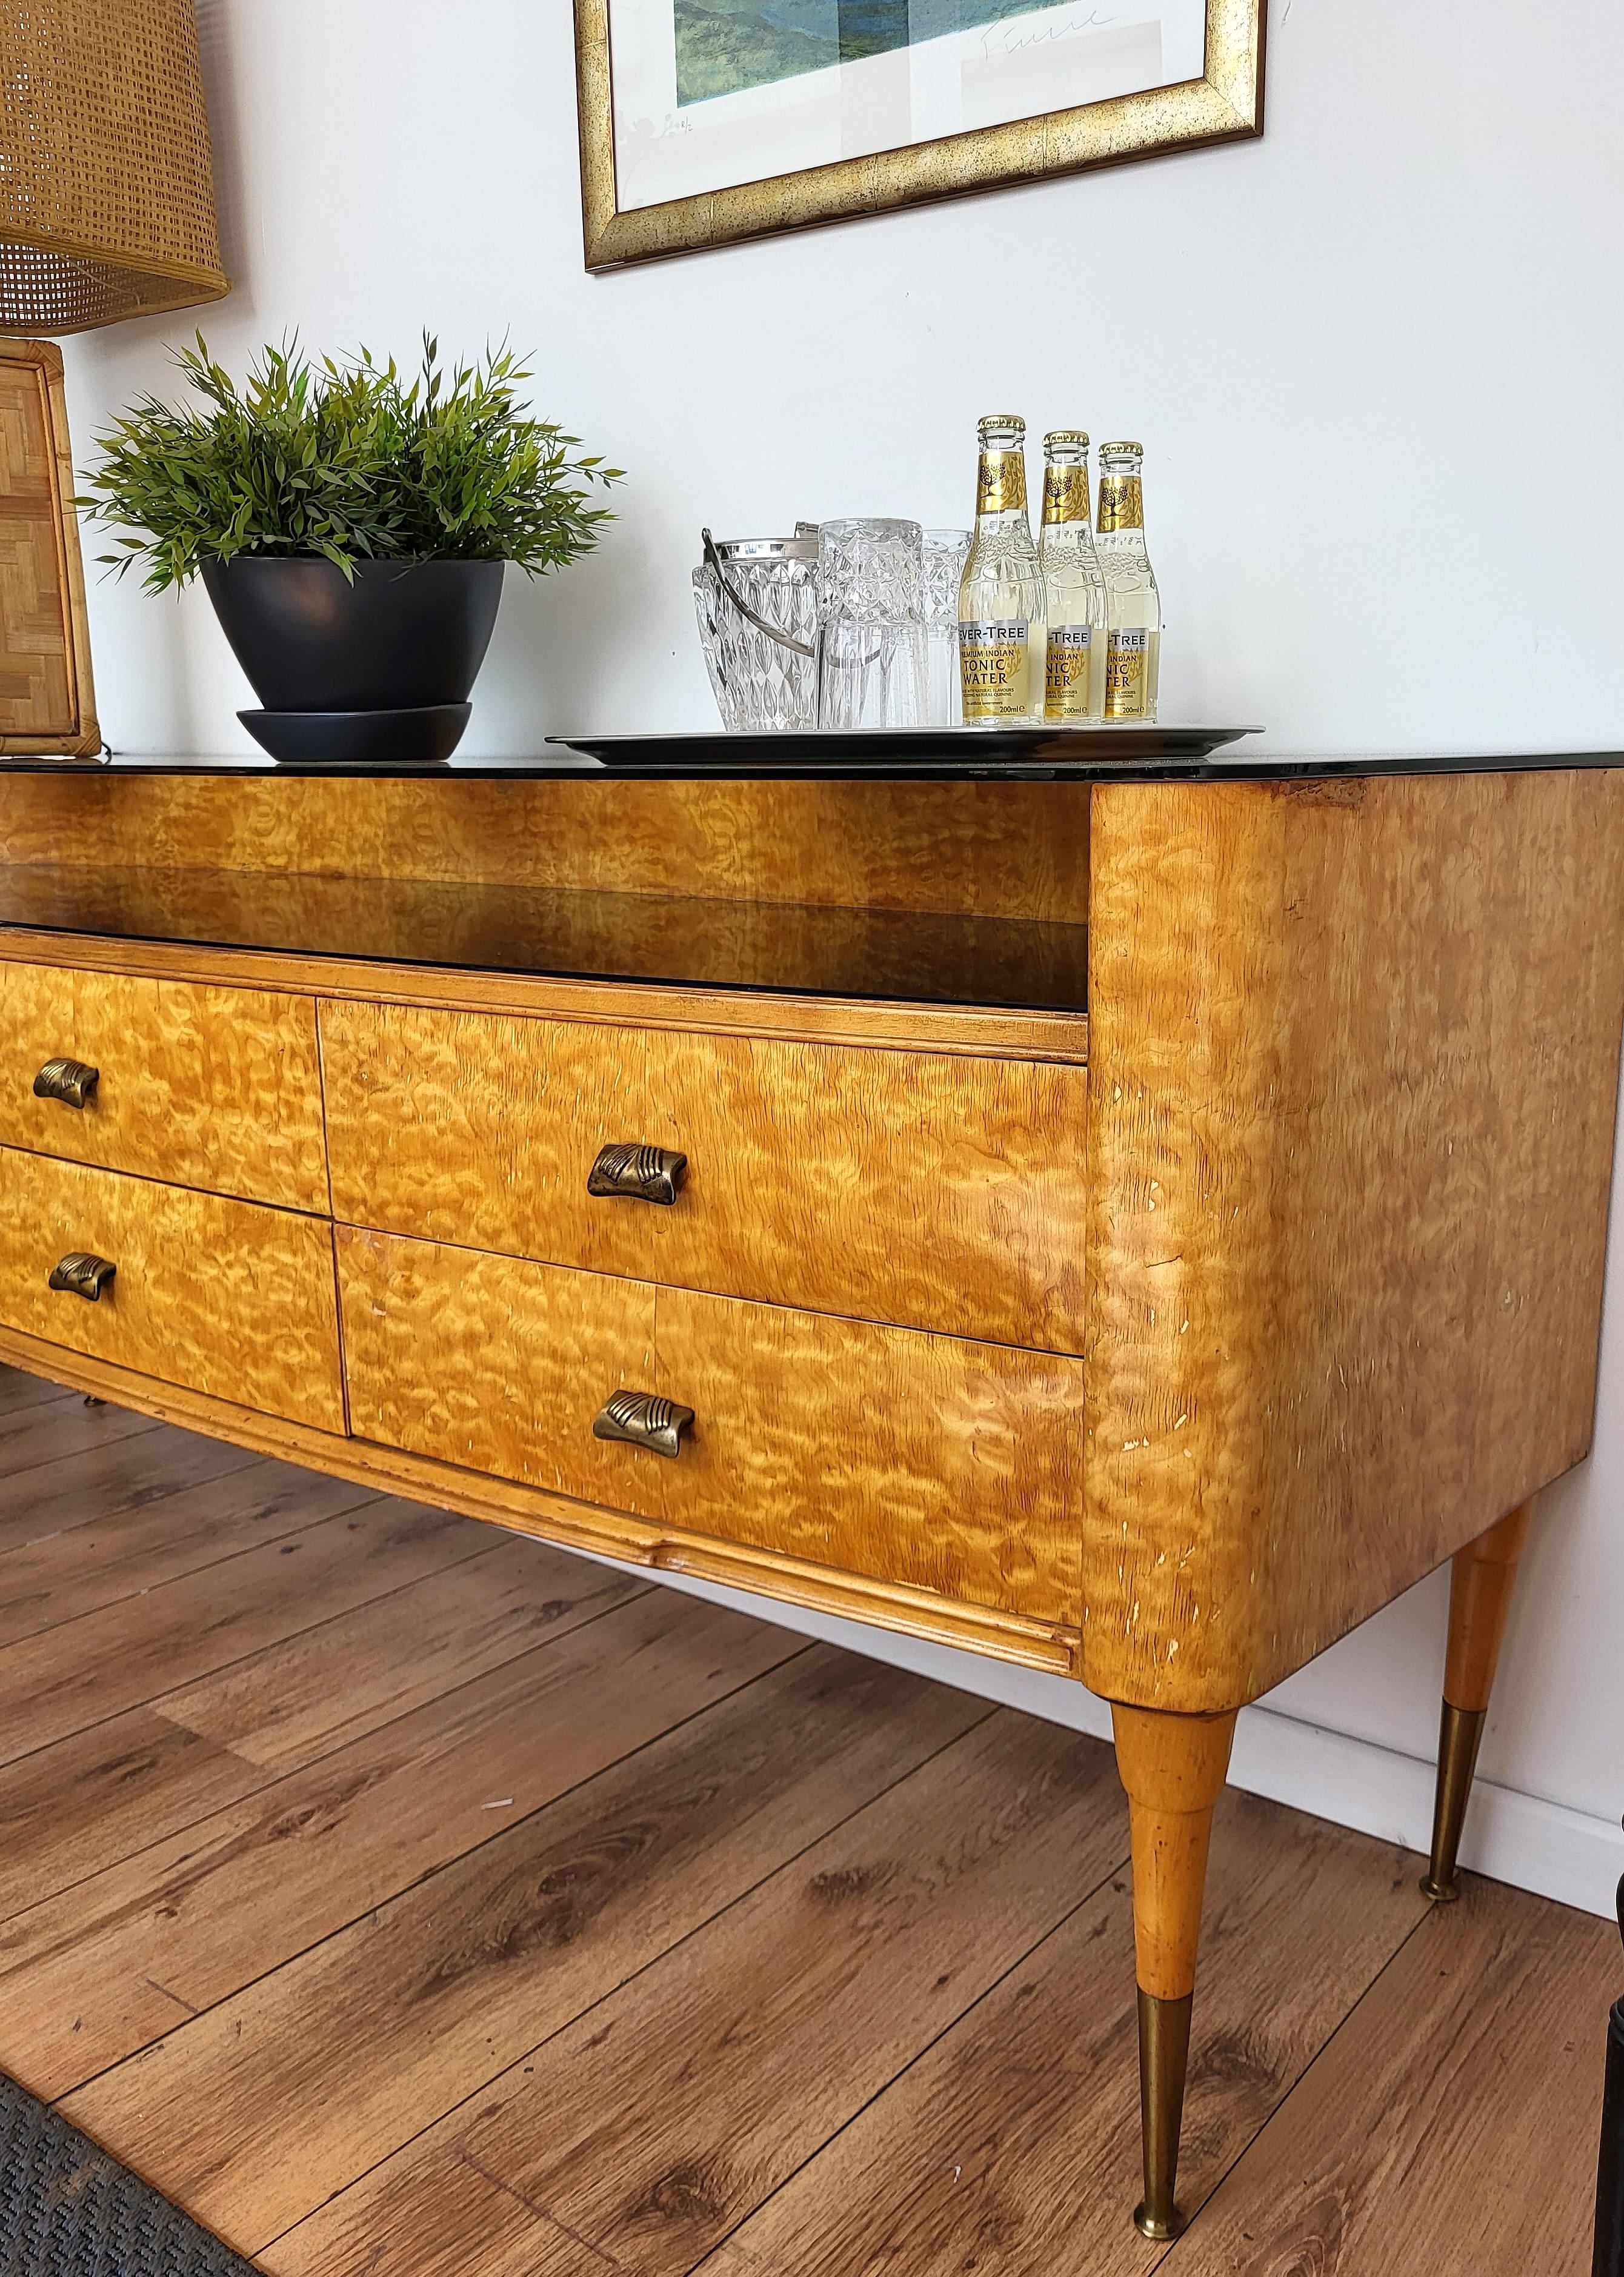 20th Century 1950s Italian Art Deco Mid-Century Modern Wood Glass Brass Credenza Sideboard For Sale